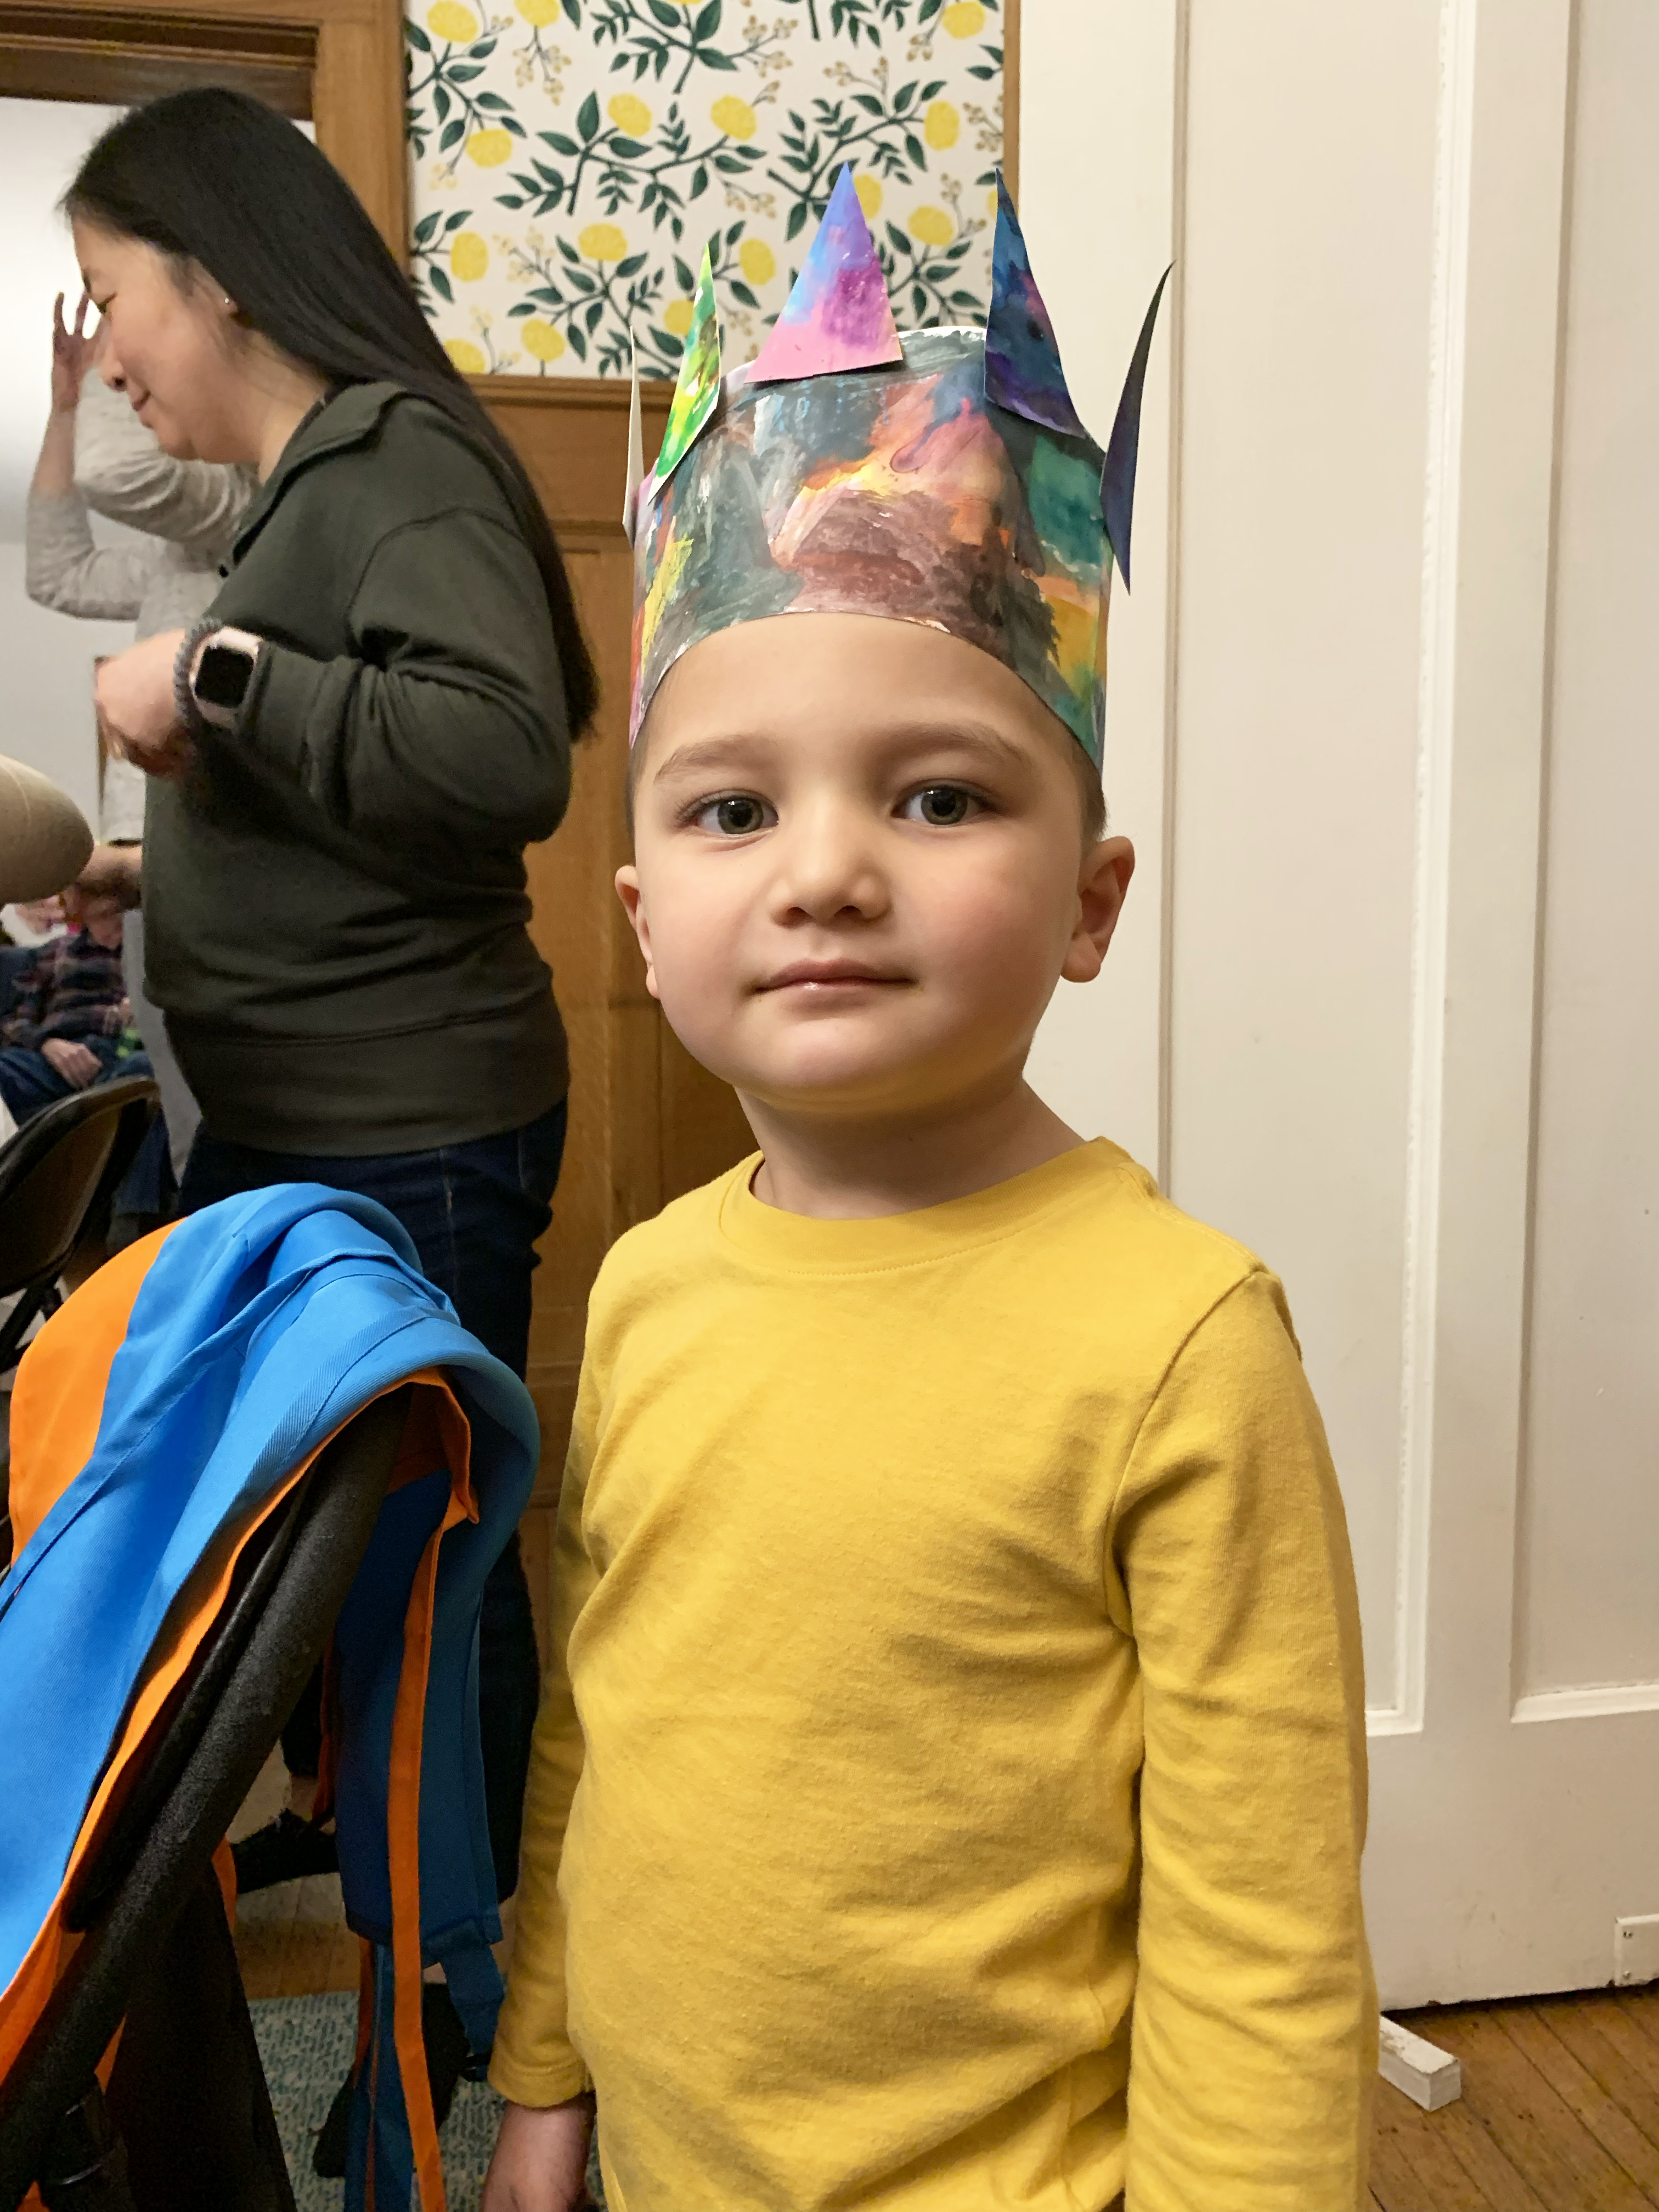 Birthday party with paper crown craft 